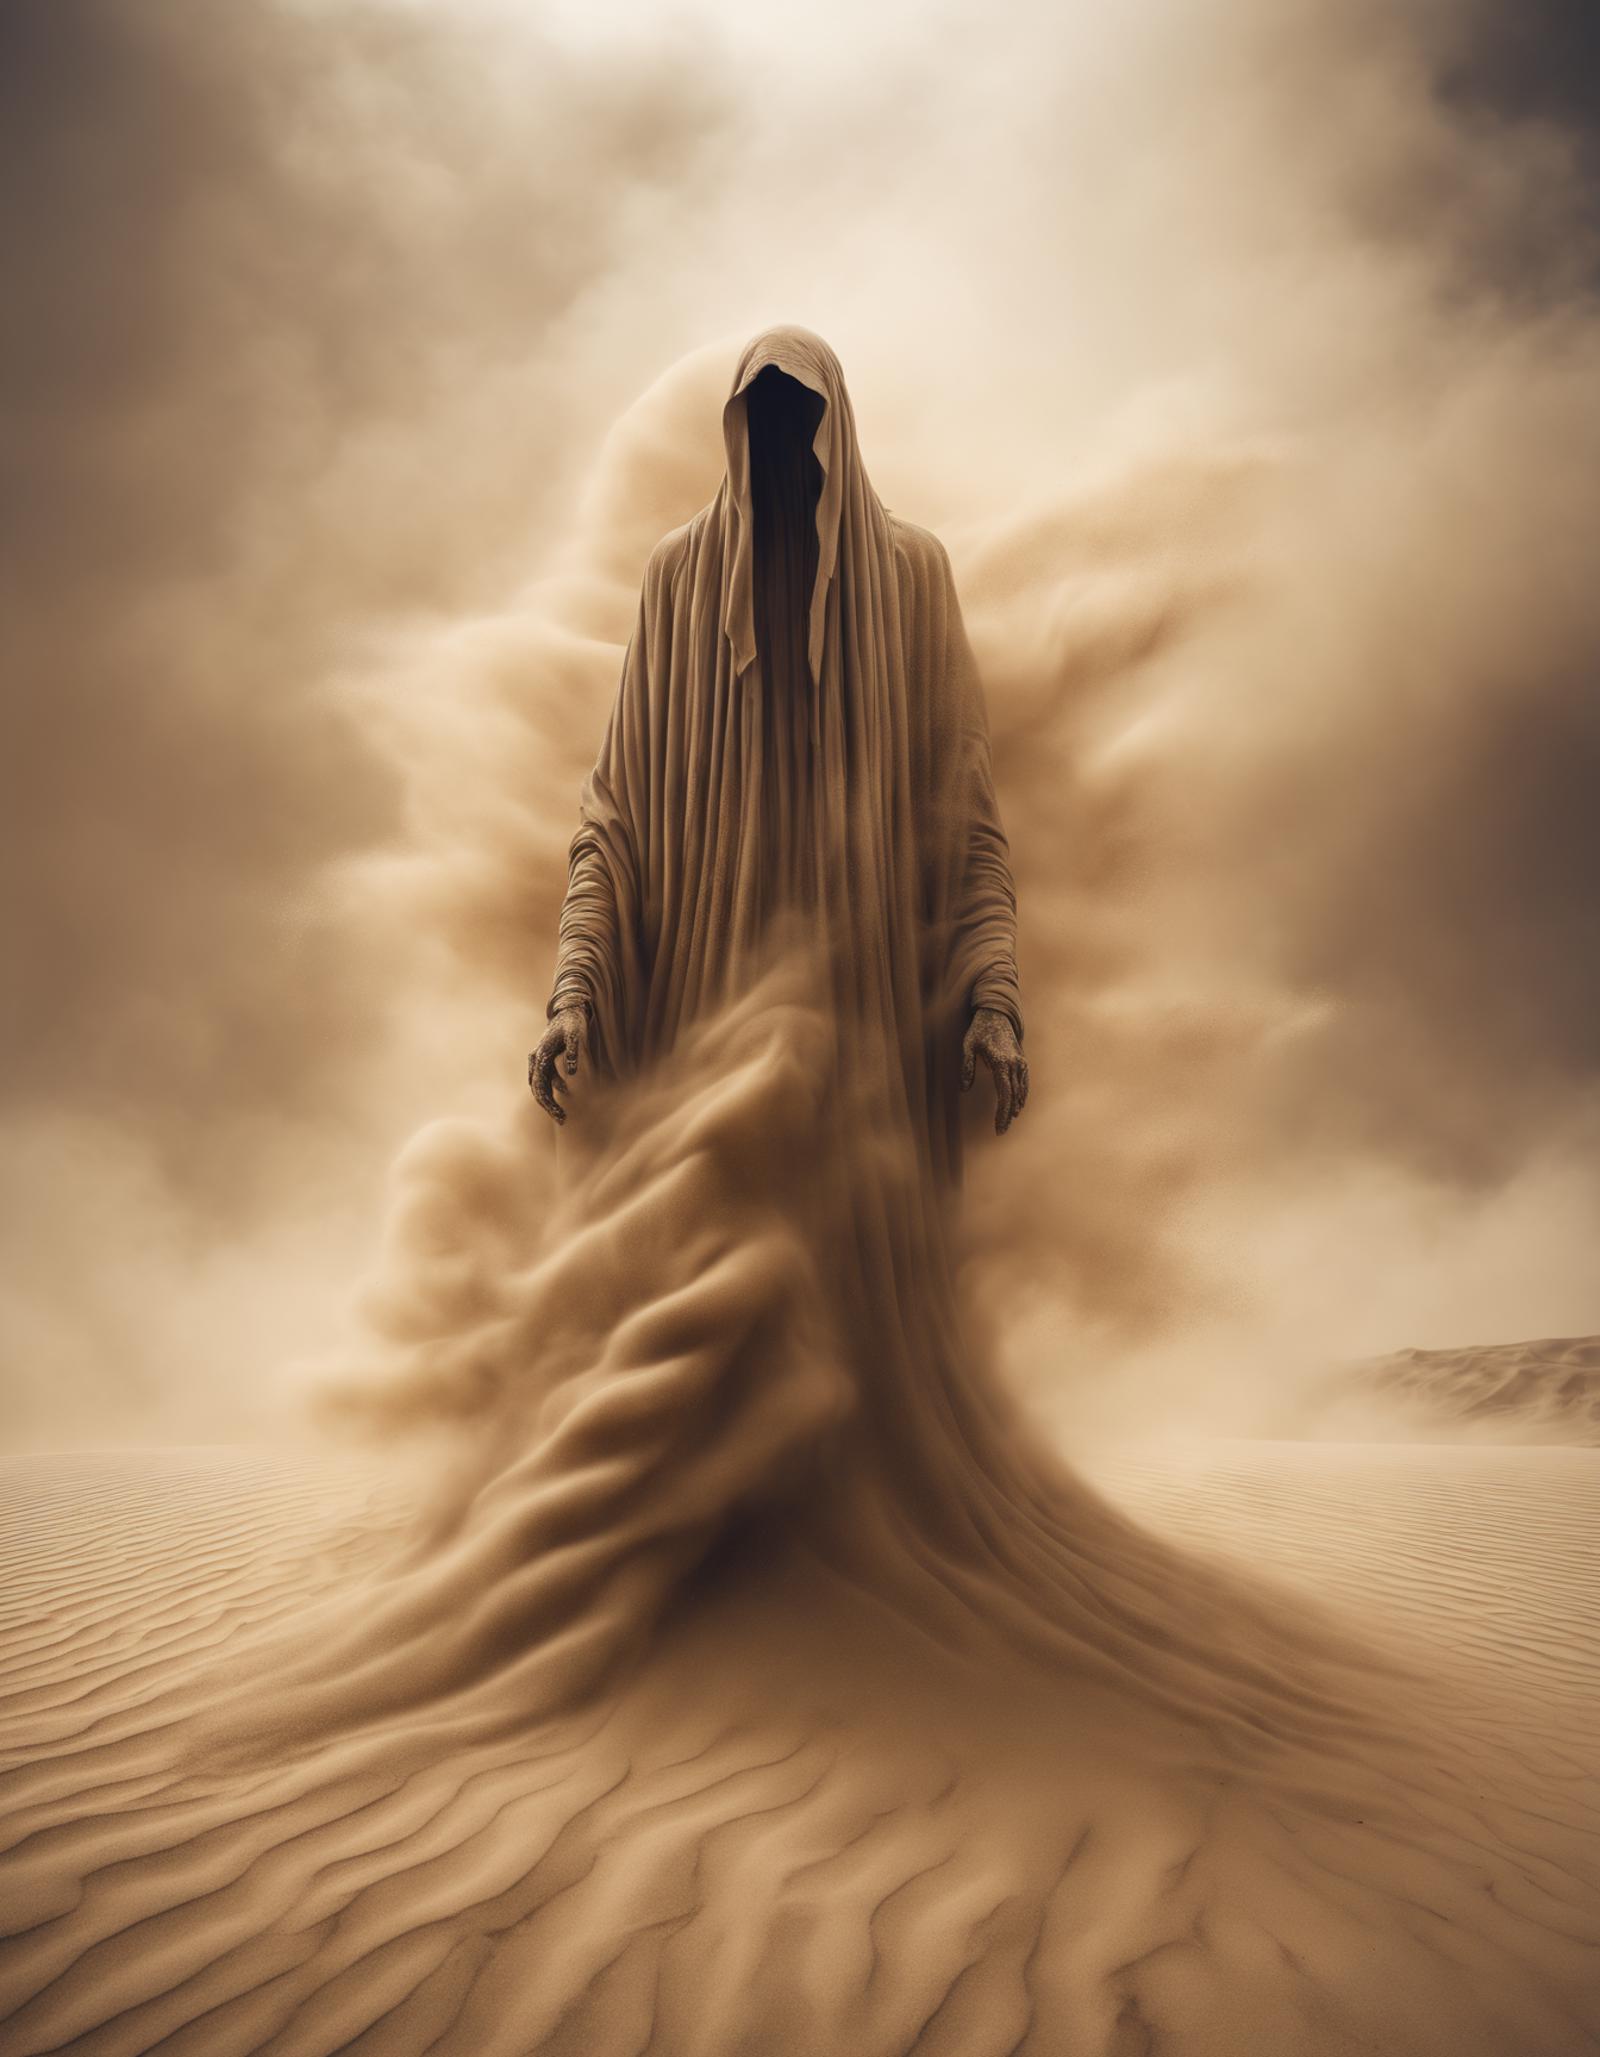 Ancient Skeletal Figure with Robe and Hood in a Dusty Environment.